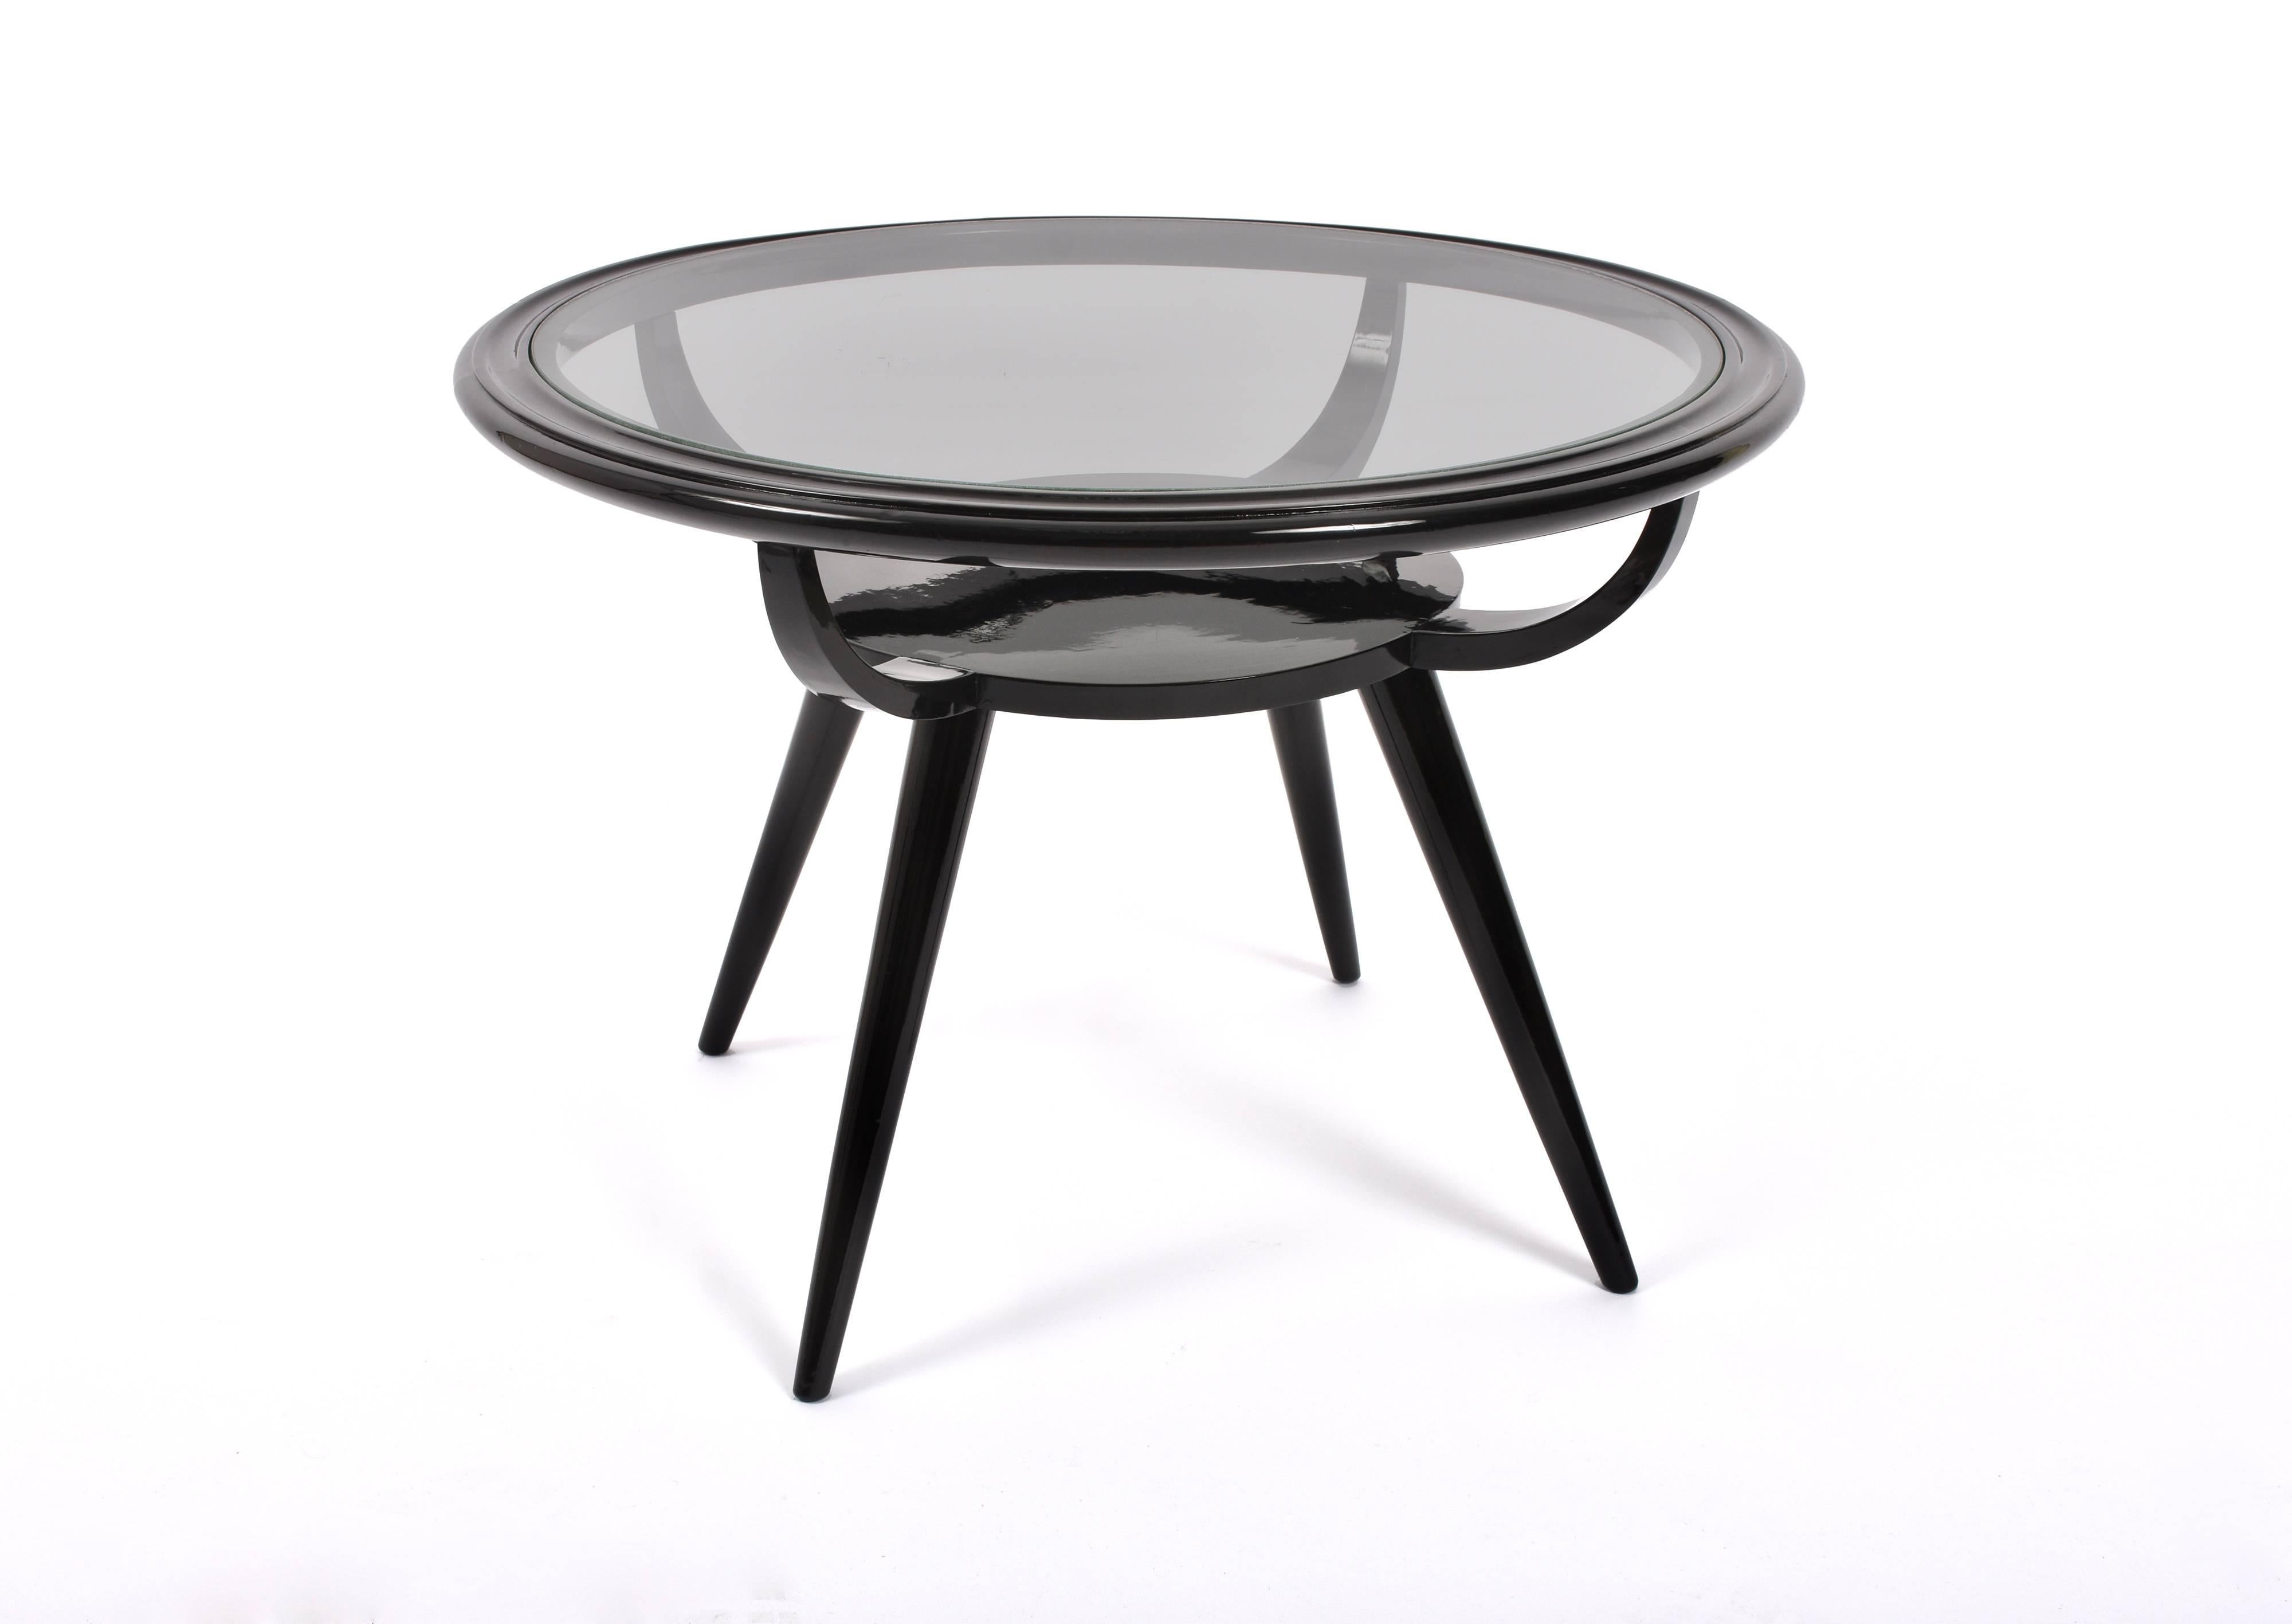 Wonderful Art Deco round black lacquered wood with glass top coffee table.

It was produced during 1940 in Italy following the style of Ico Parisi.

It is professionally restored and would be a great addition for an Art Deco living room or, as a